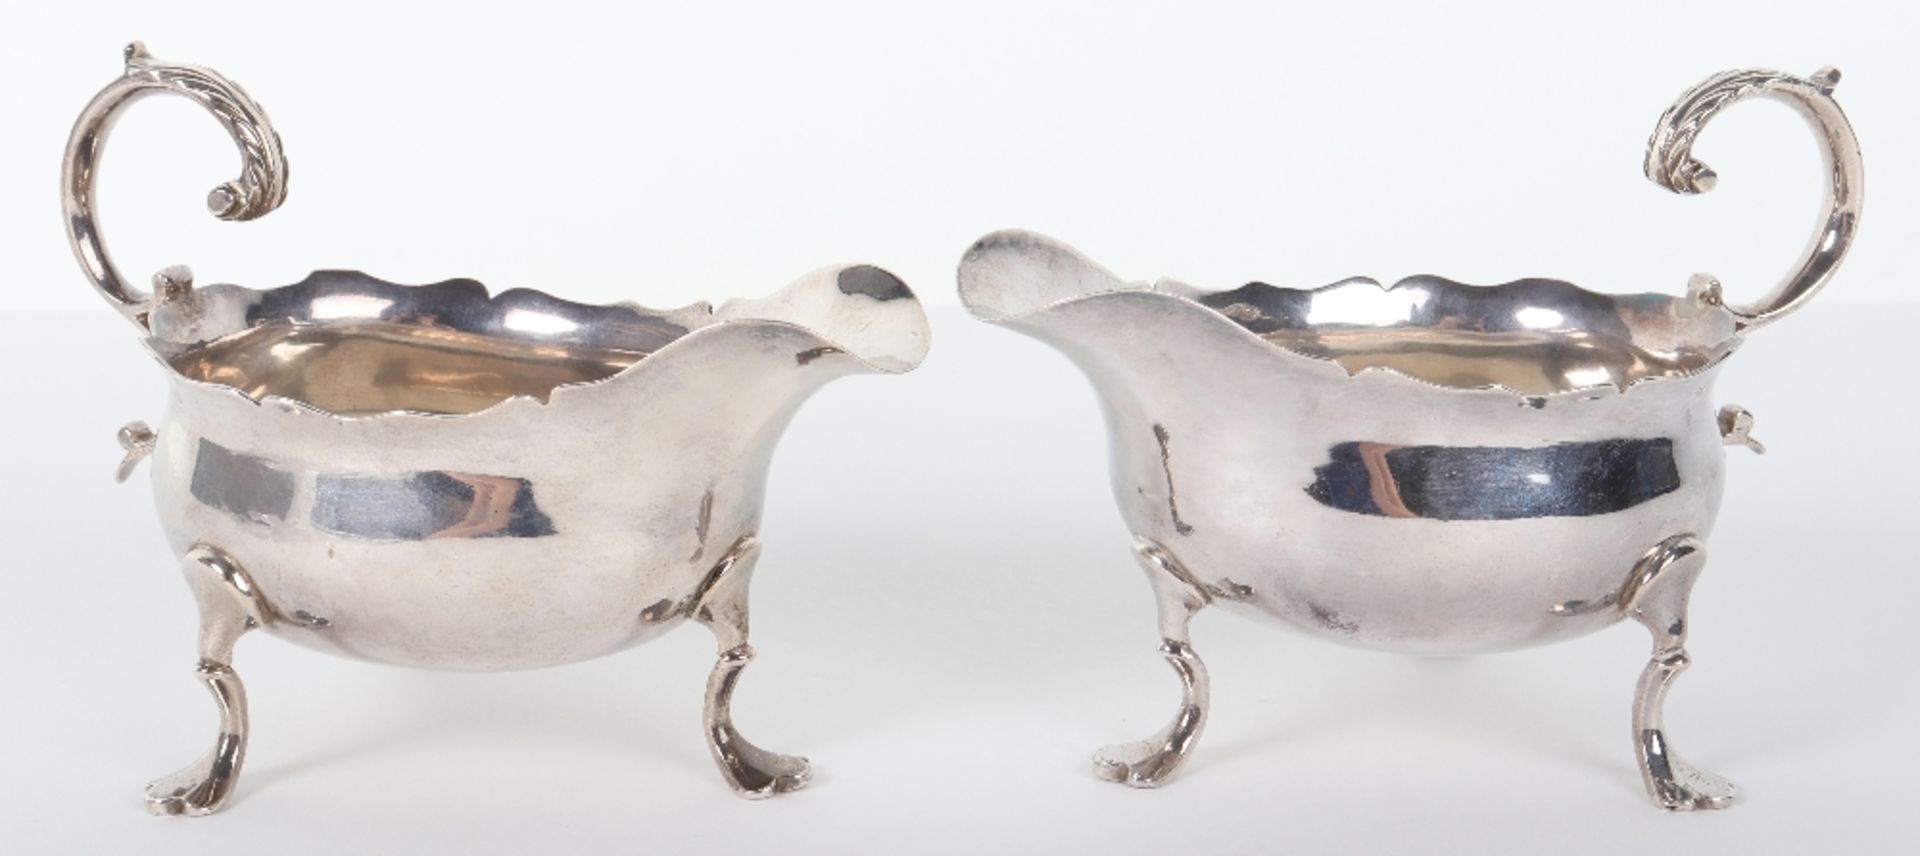 A pair of George II silver sauce boats of small proportions, Alexander Johnston, London 1759